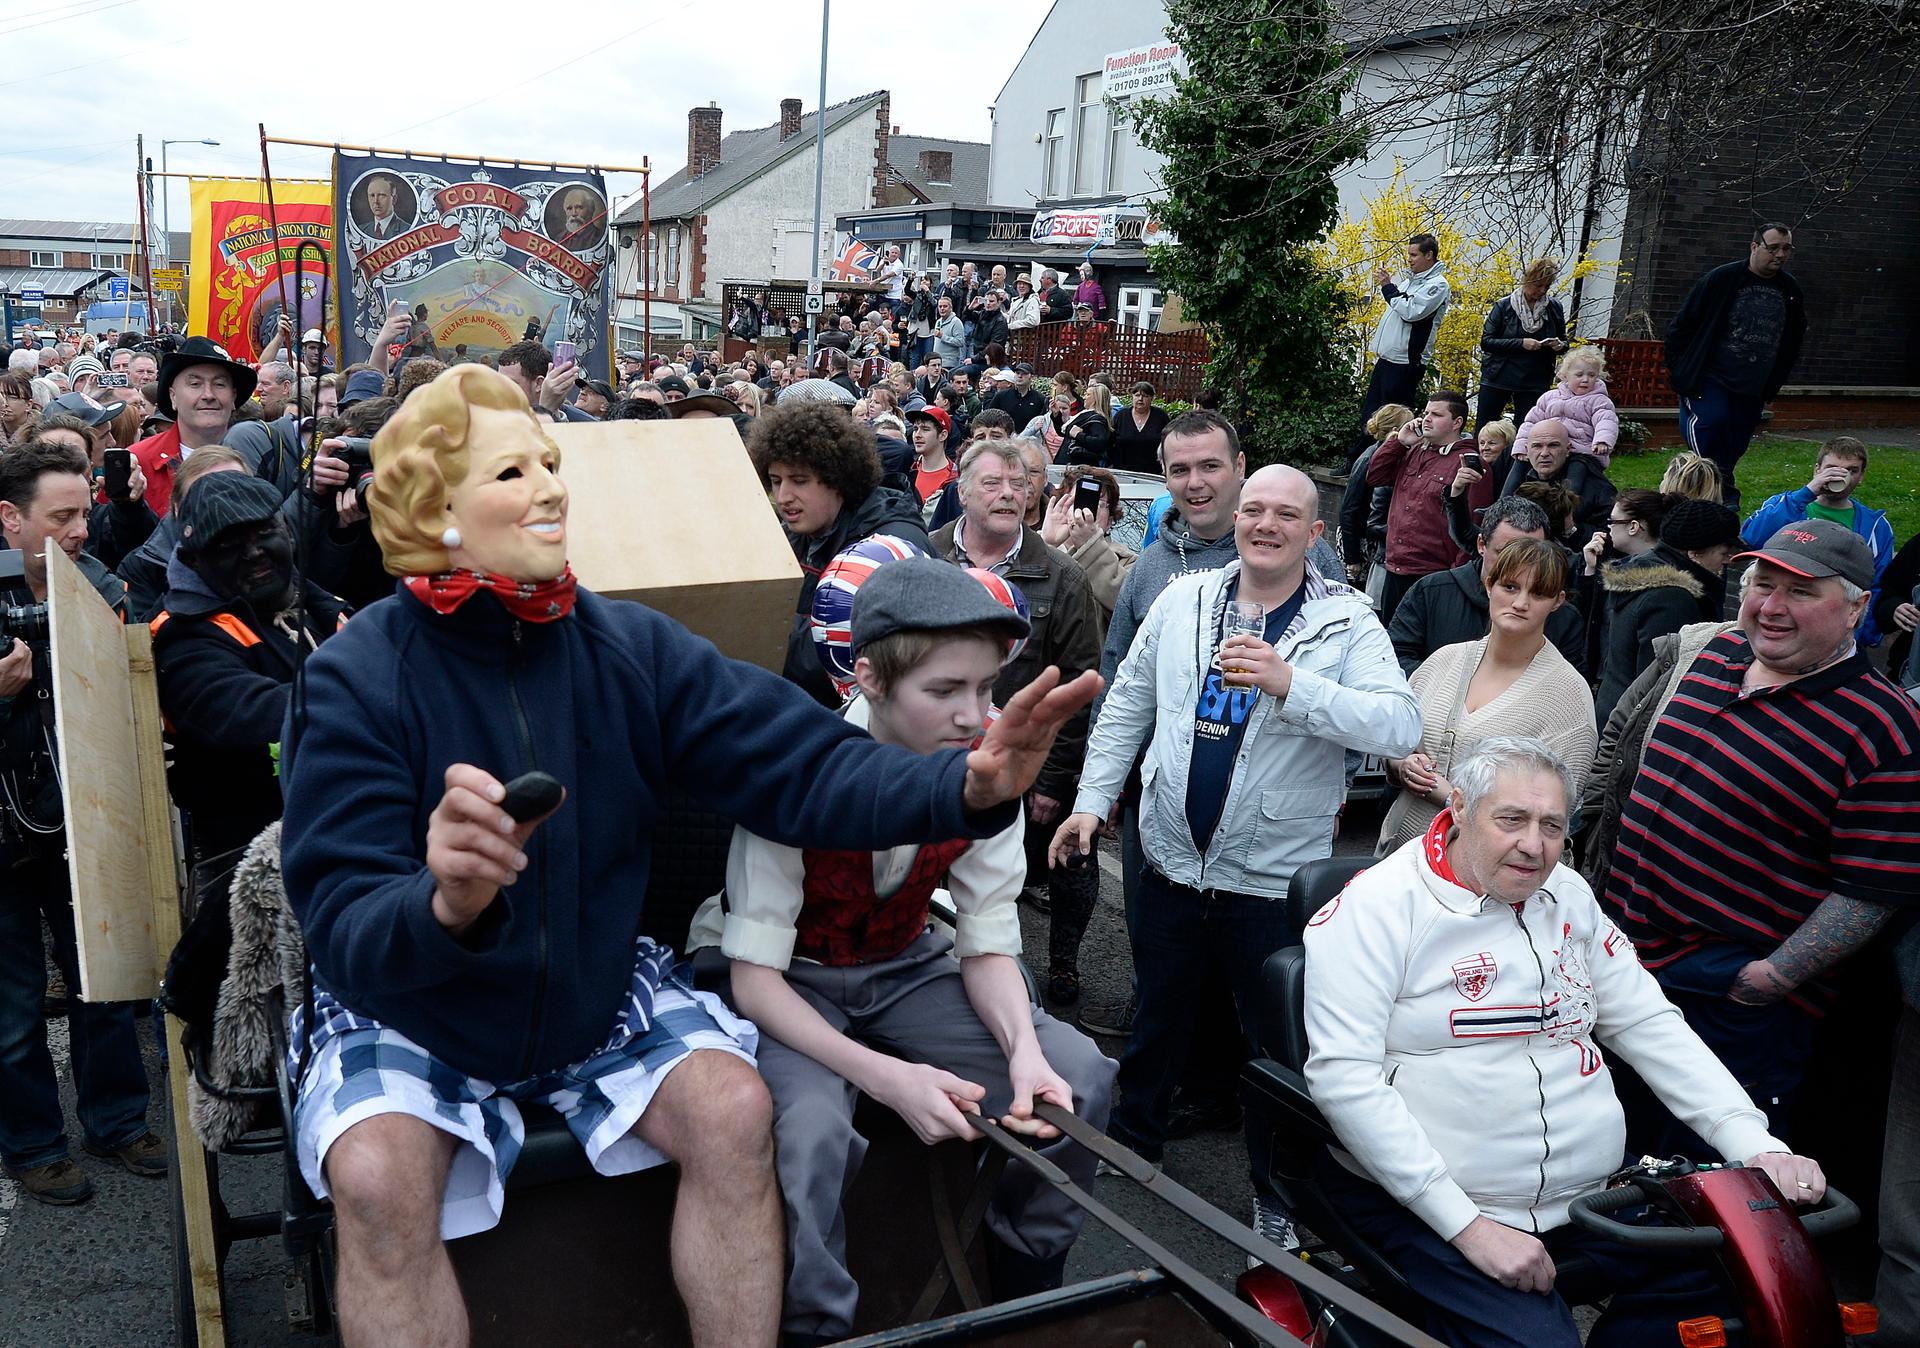 Parade with person in Margaret Thatcher mask